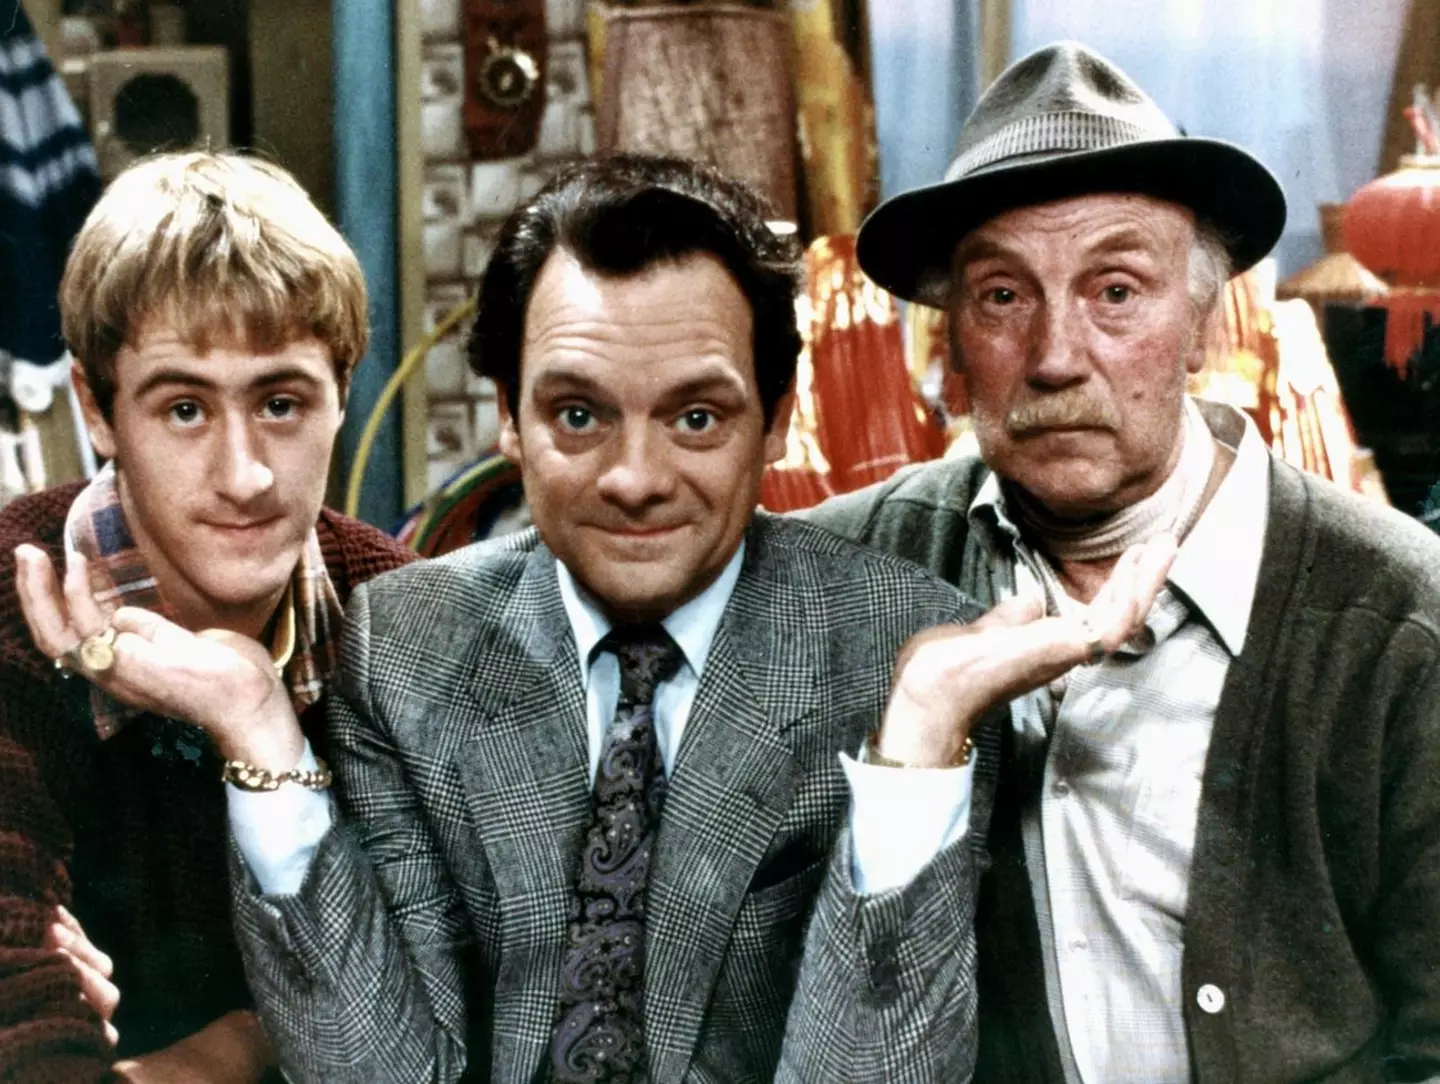 Nicholas Lyndhurst (far left) in Only Fools and Horses.